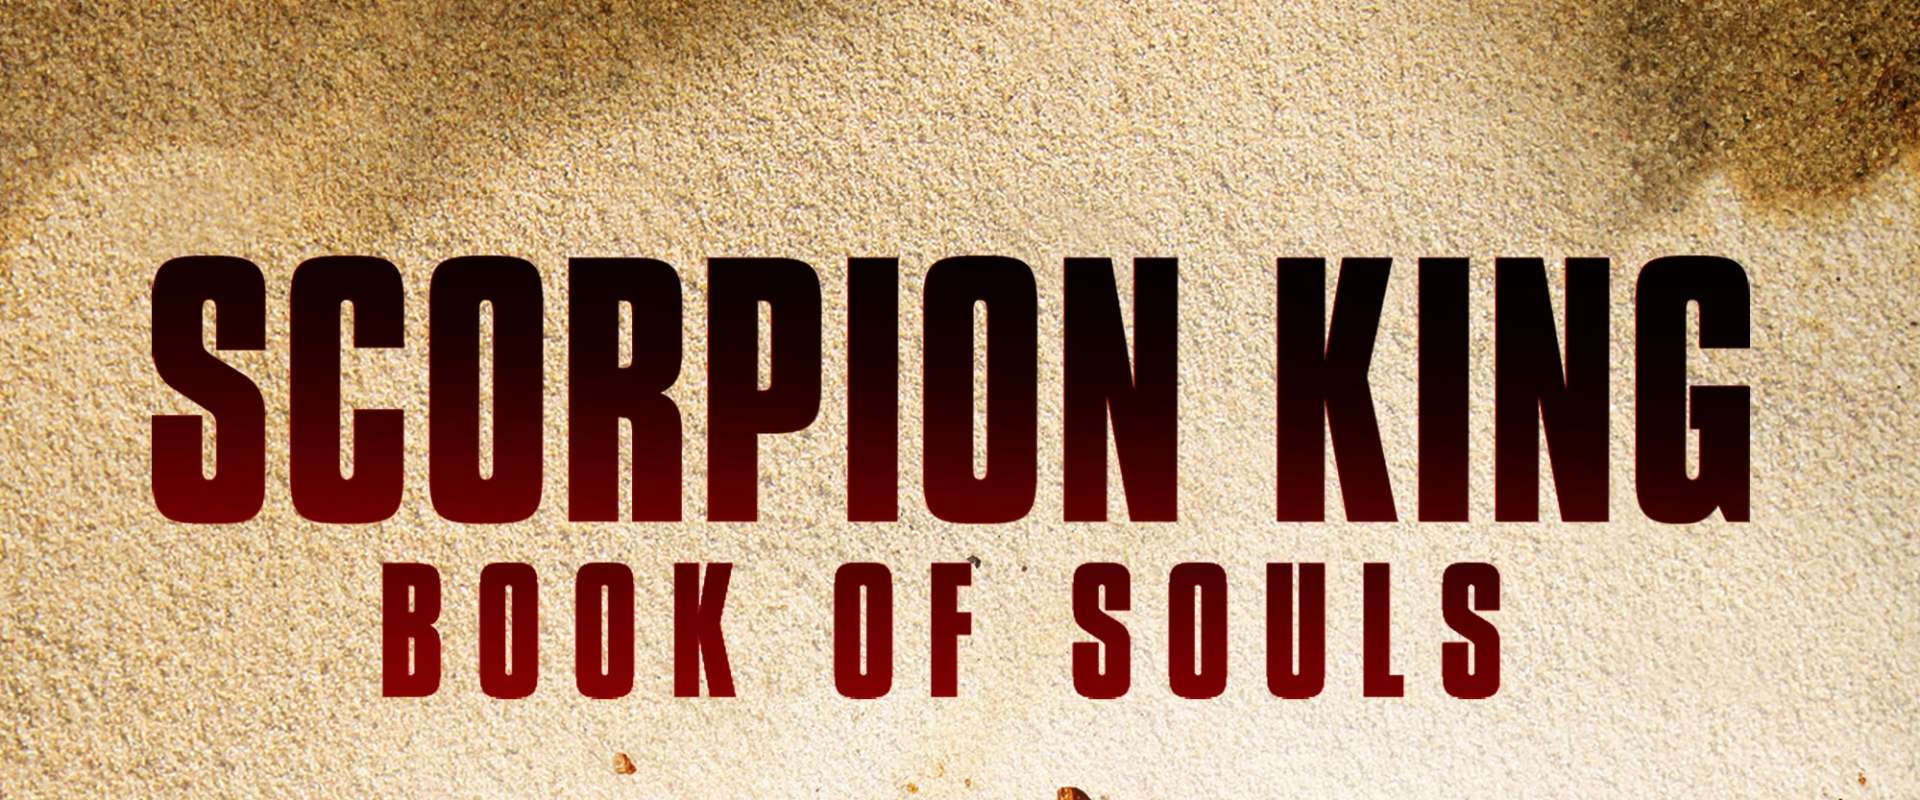 The Scorpion King: Book of Souls background 1